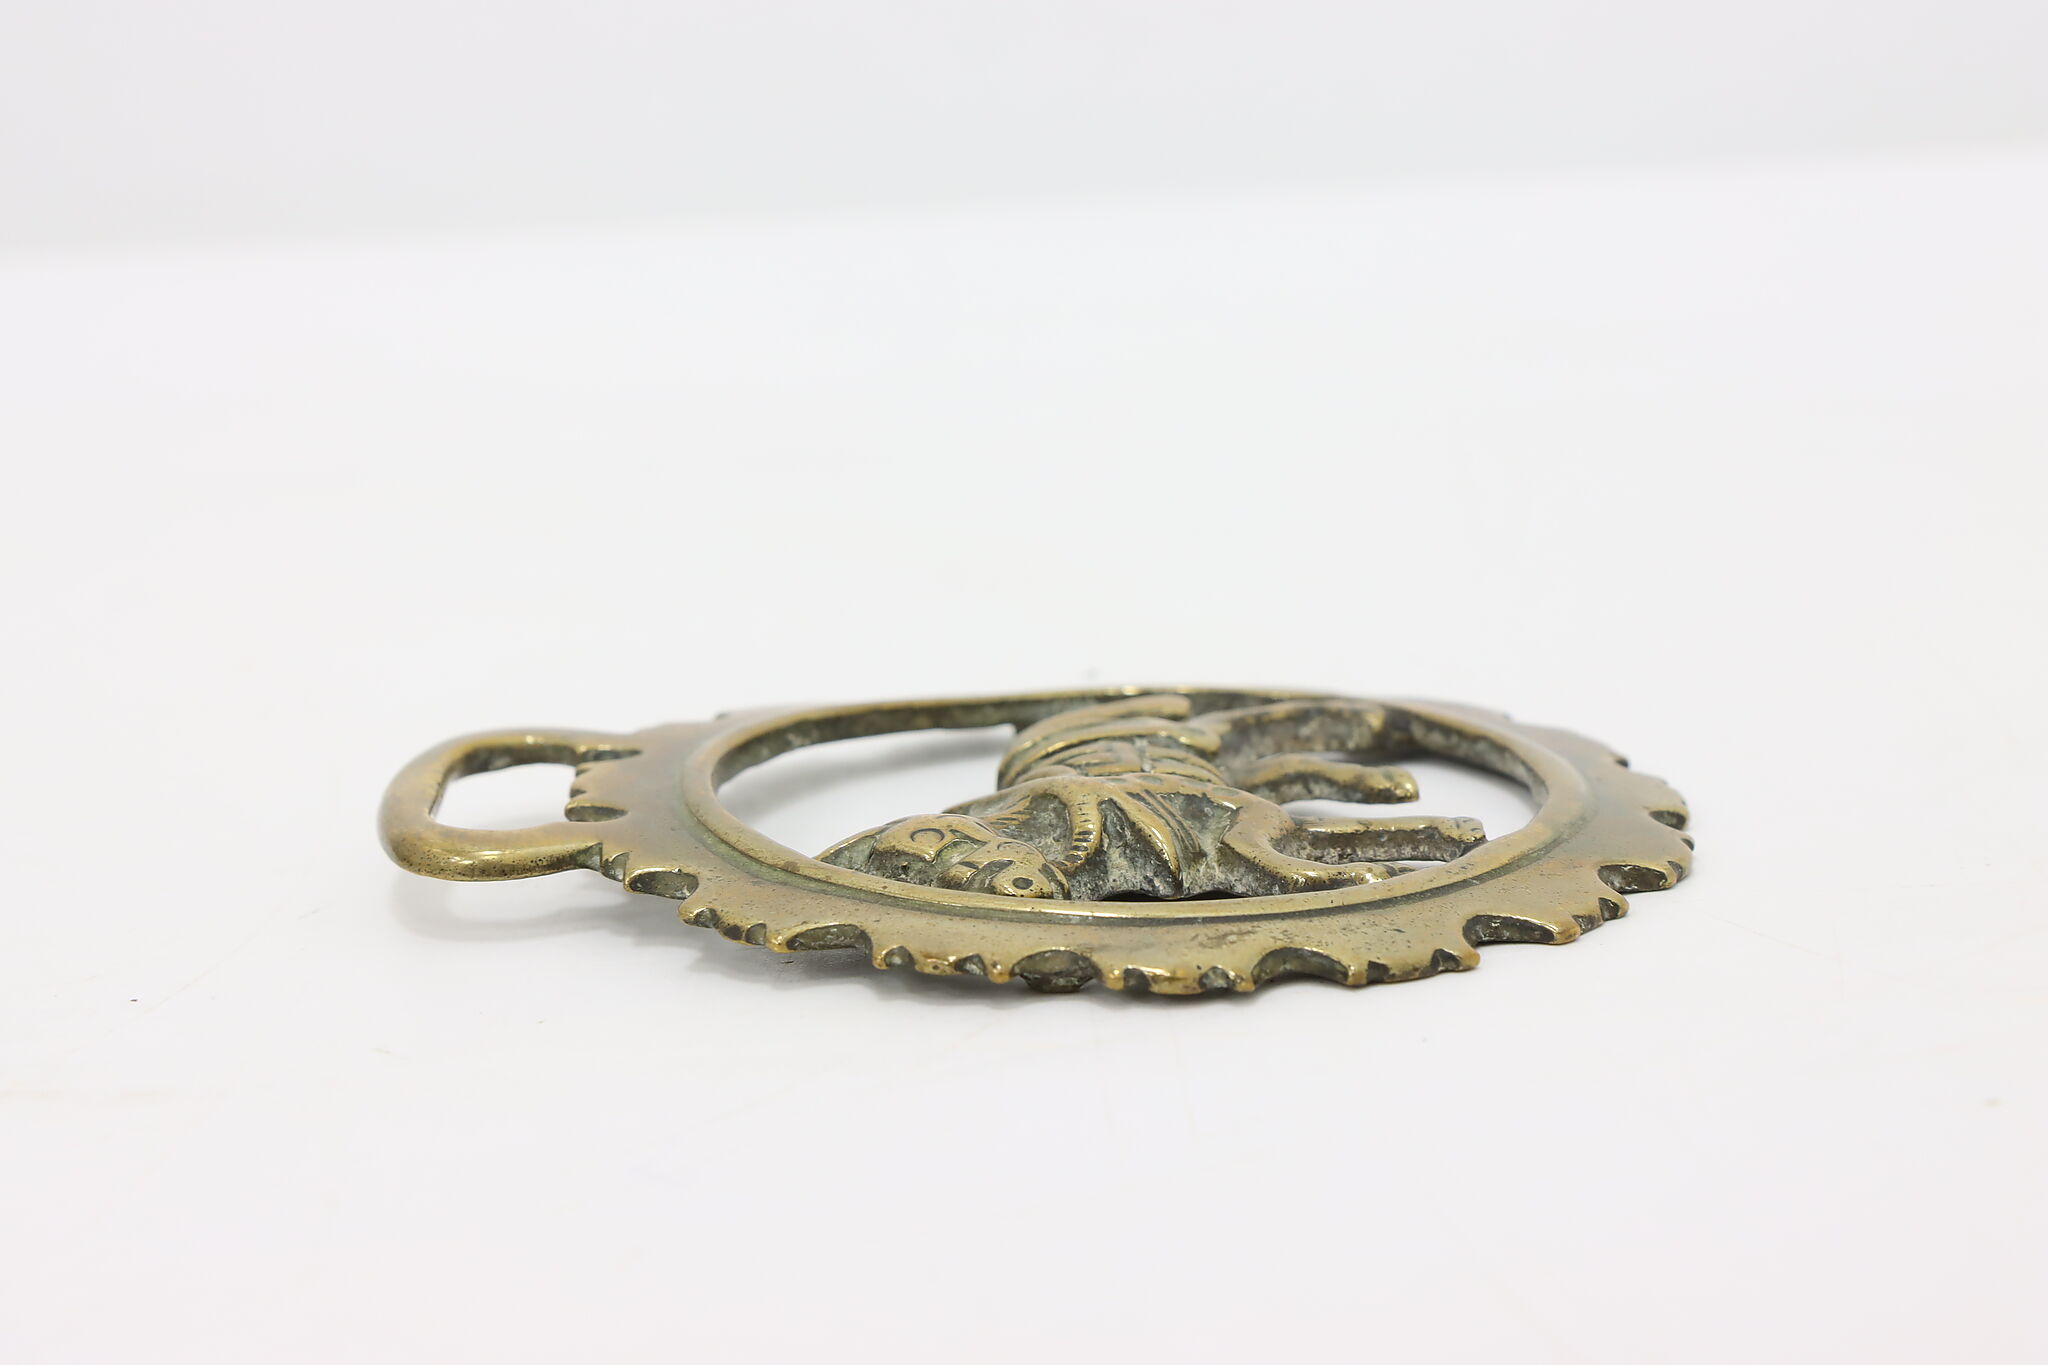 Vintage Brass Horse Harness Medallion Wales w/Gryphon